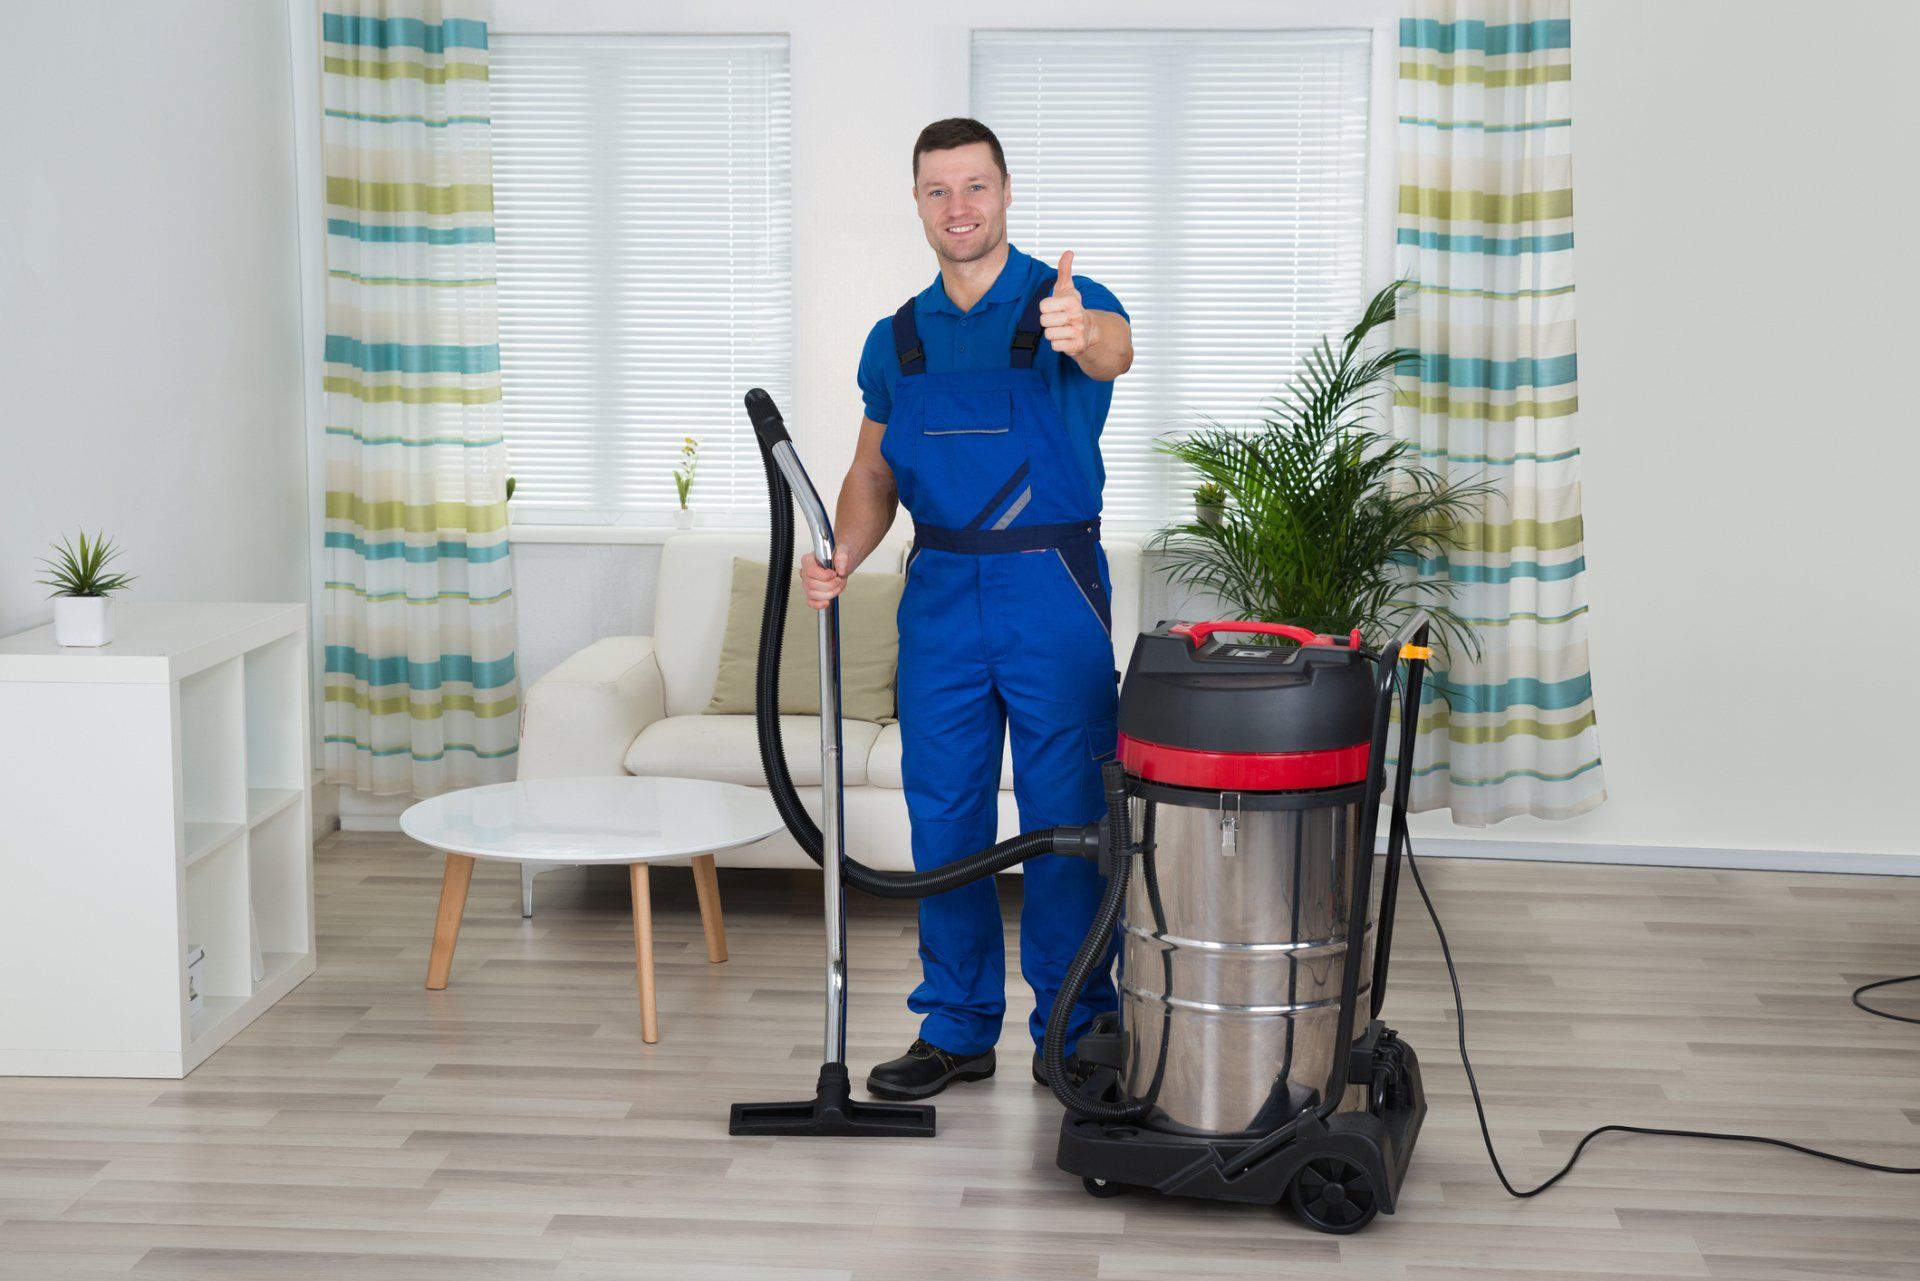 Janitor Thumbs Up - Northport, AL - Beacon Cleaning Services